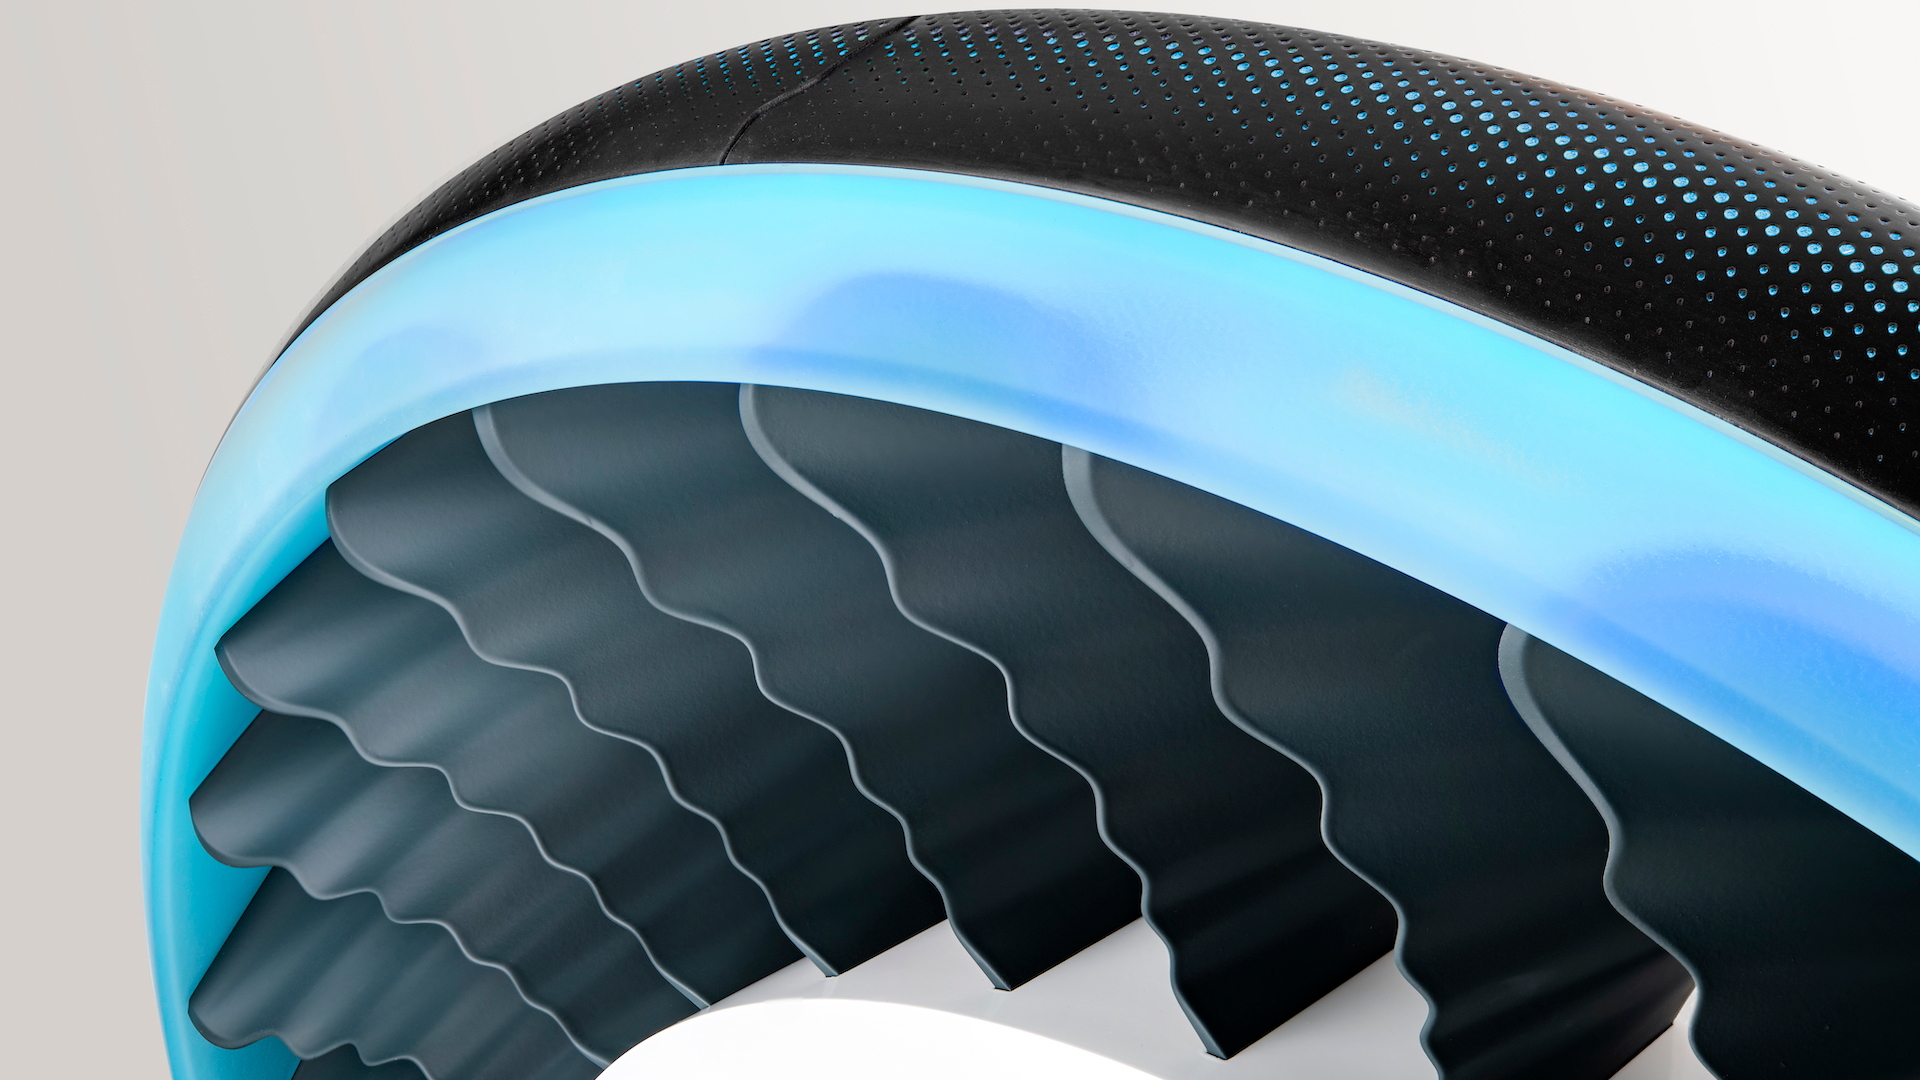 Goodyear Aero tire concept for flying cars